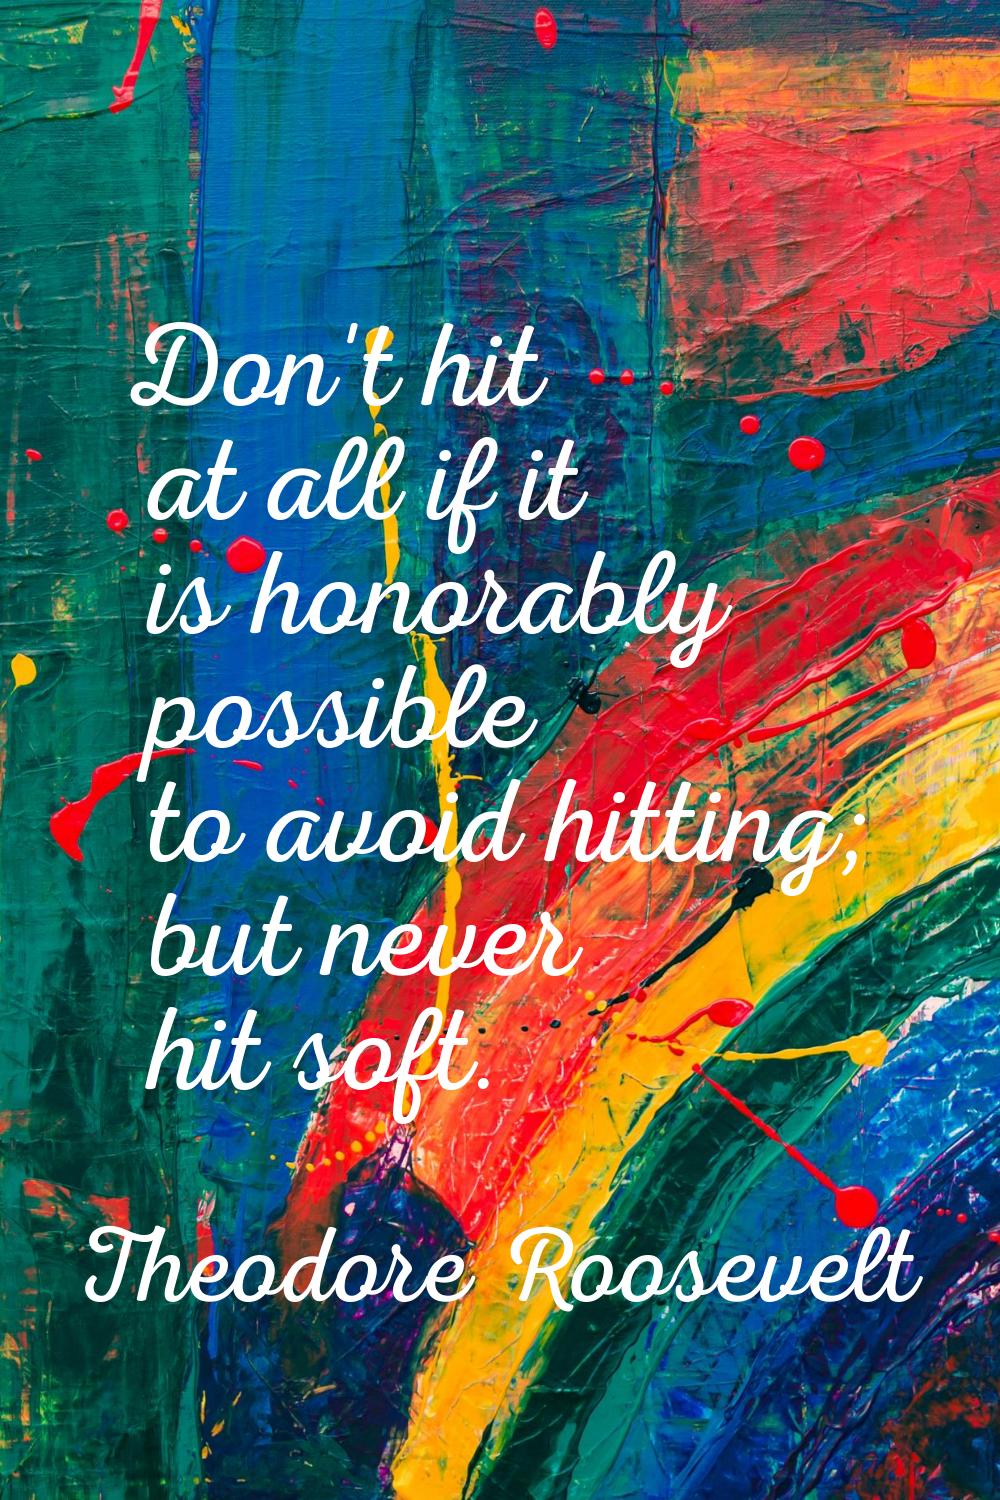 Don't hit at all if it is honorably possible to avoid hitting; but never hit soft.